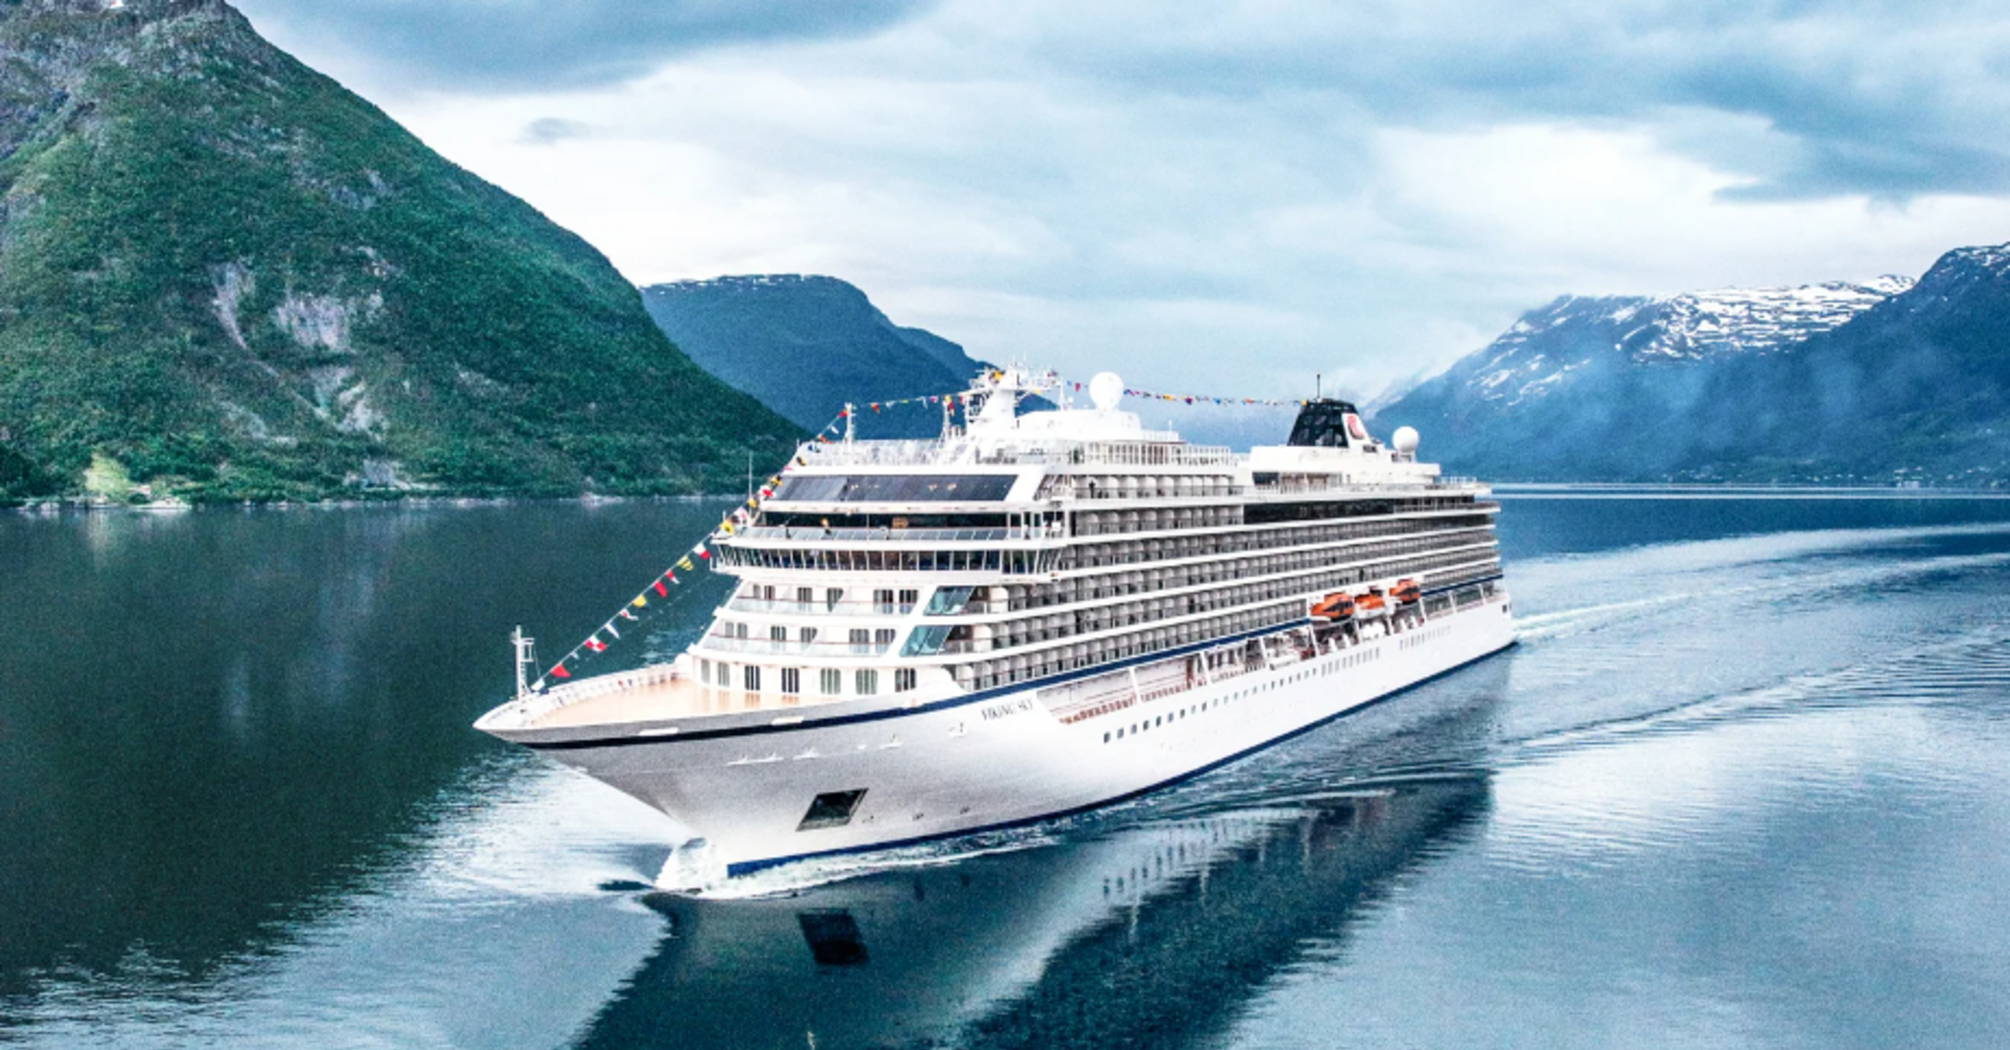 Embark on an unforgettable journey with Viking Cruises